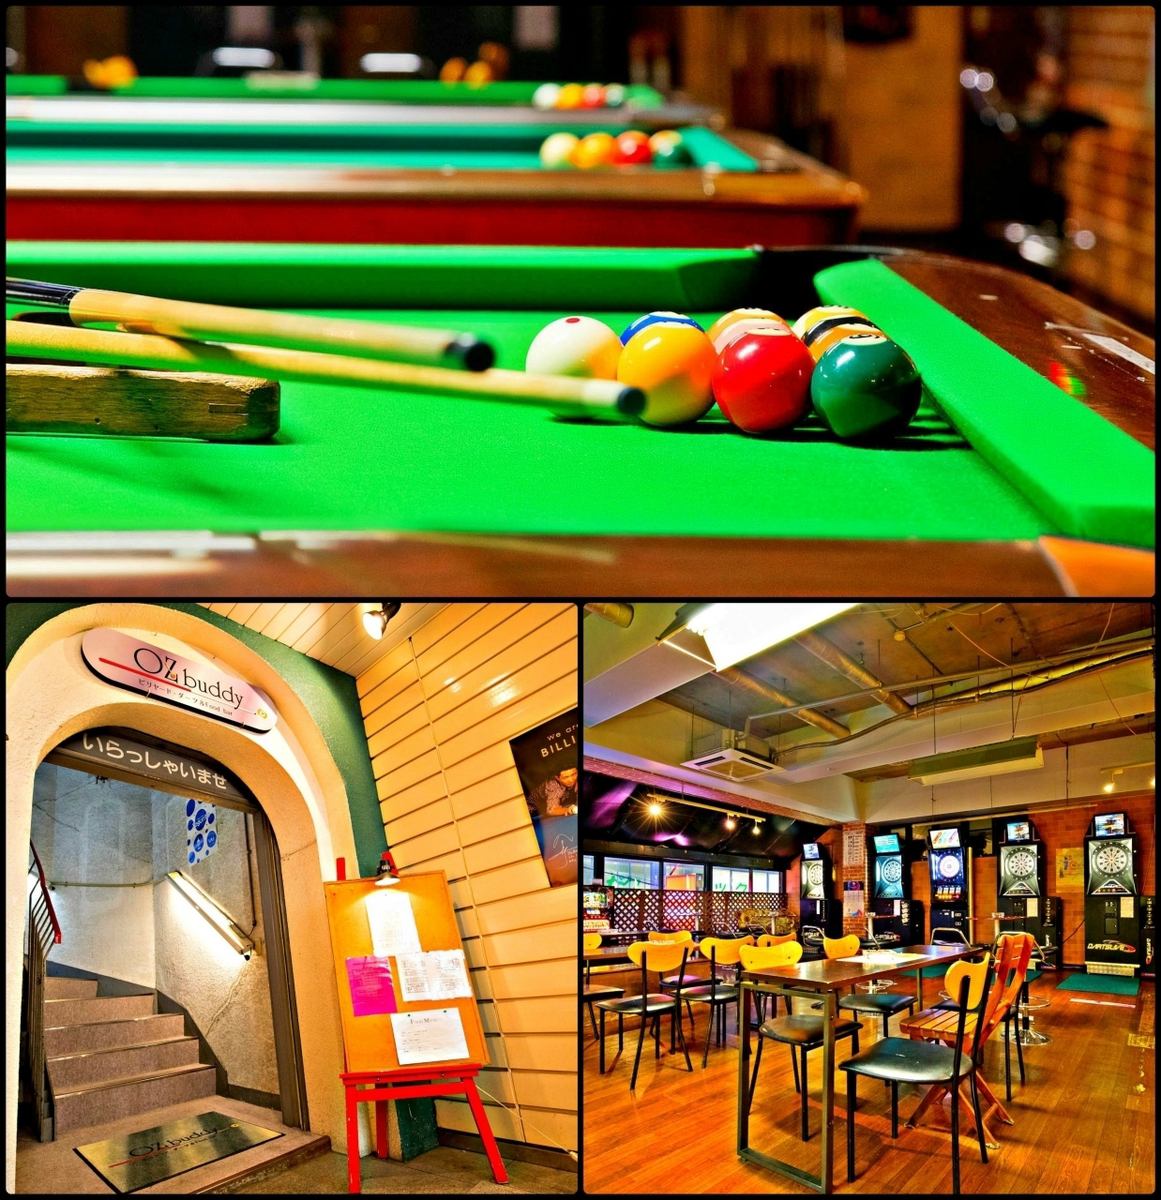 [Billiards, darts, slots available] Entertainment BAR with delicious food